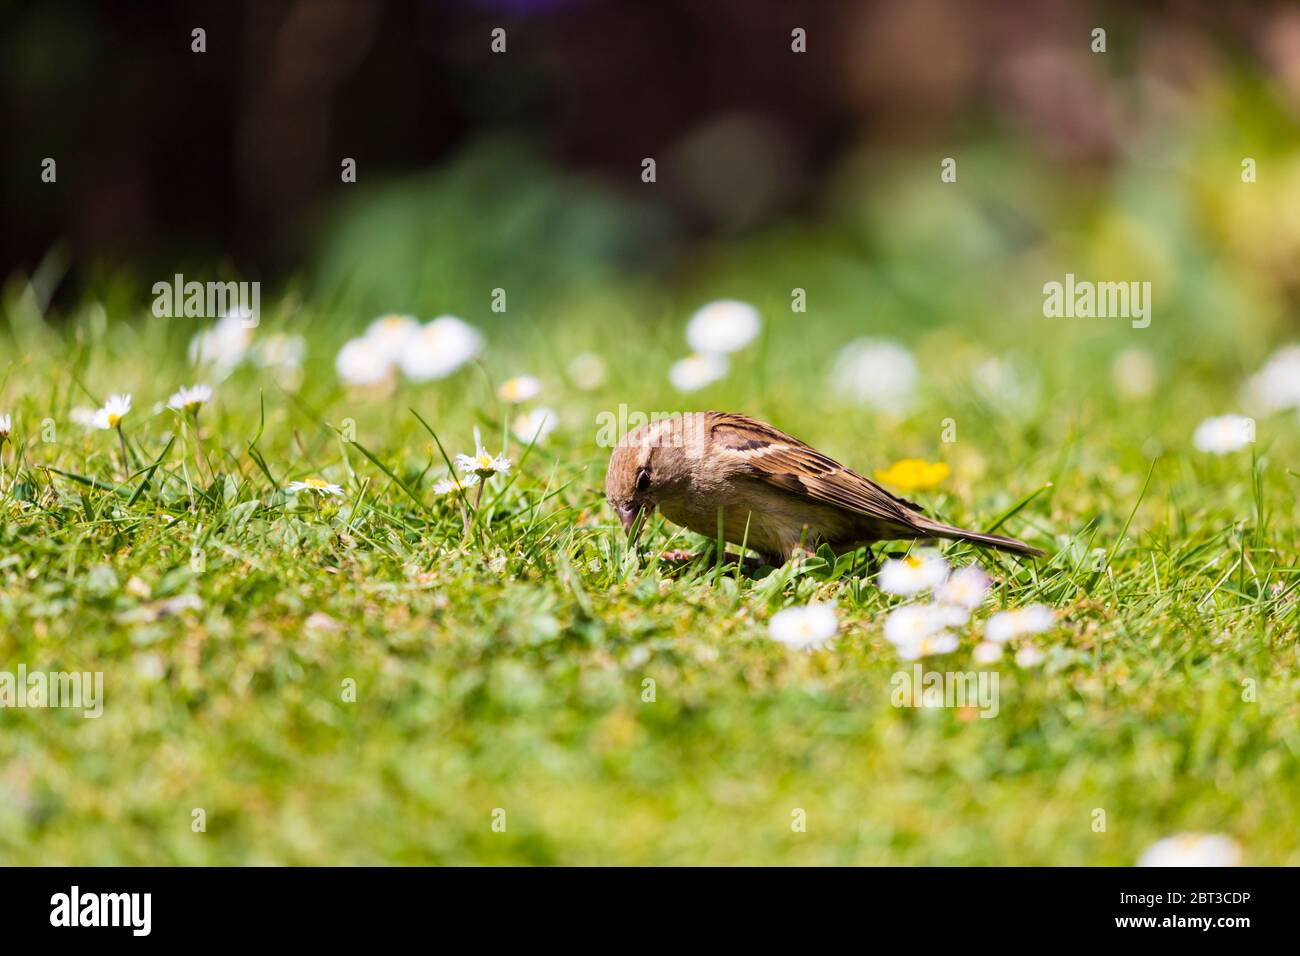 Common house sparrow, Passer Domesticus, on the grass looking for bugs. Stock Photo